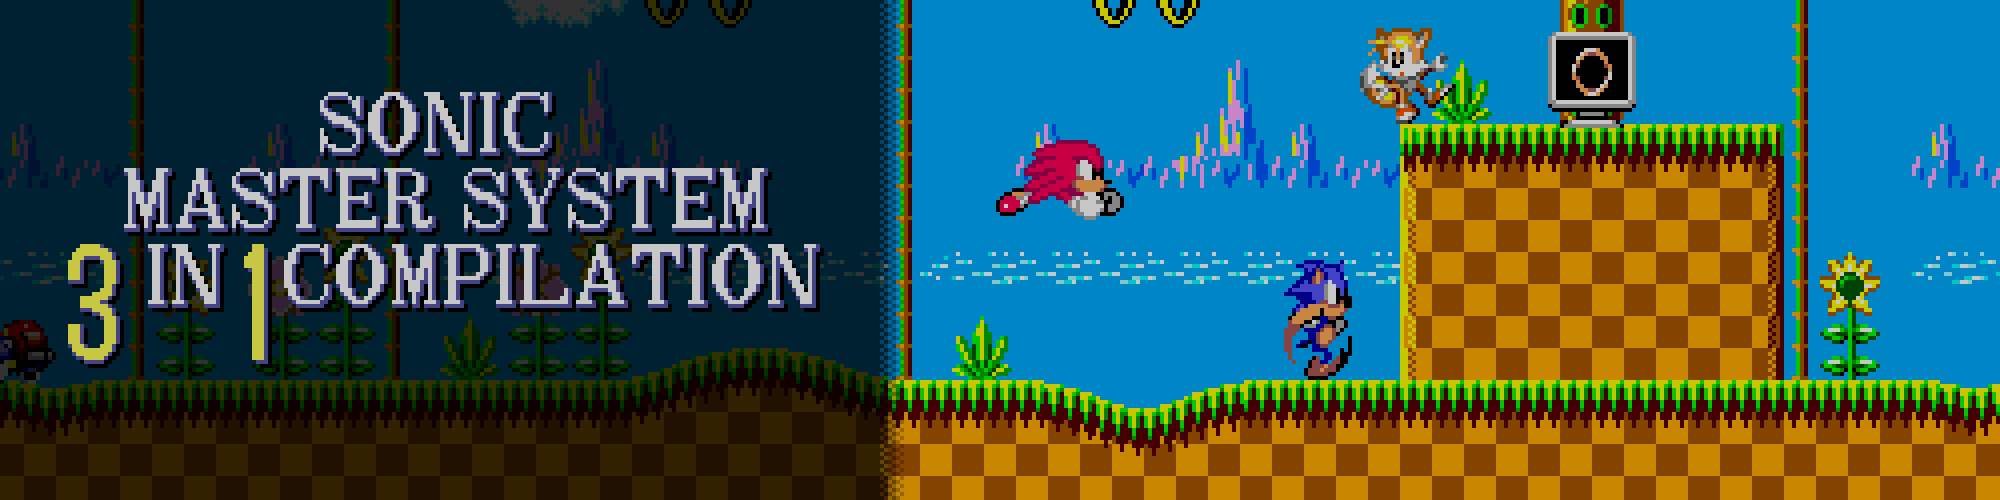 SONIC MASTER SYSTEM 3-IN-1 COMPILATION